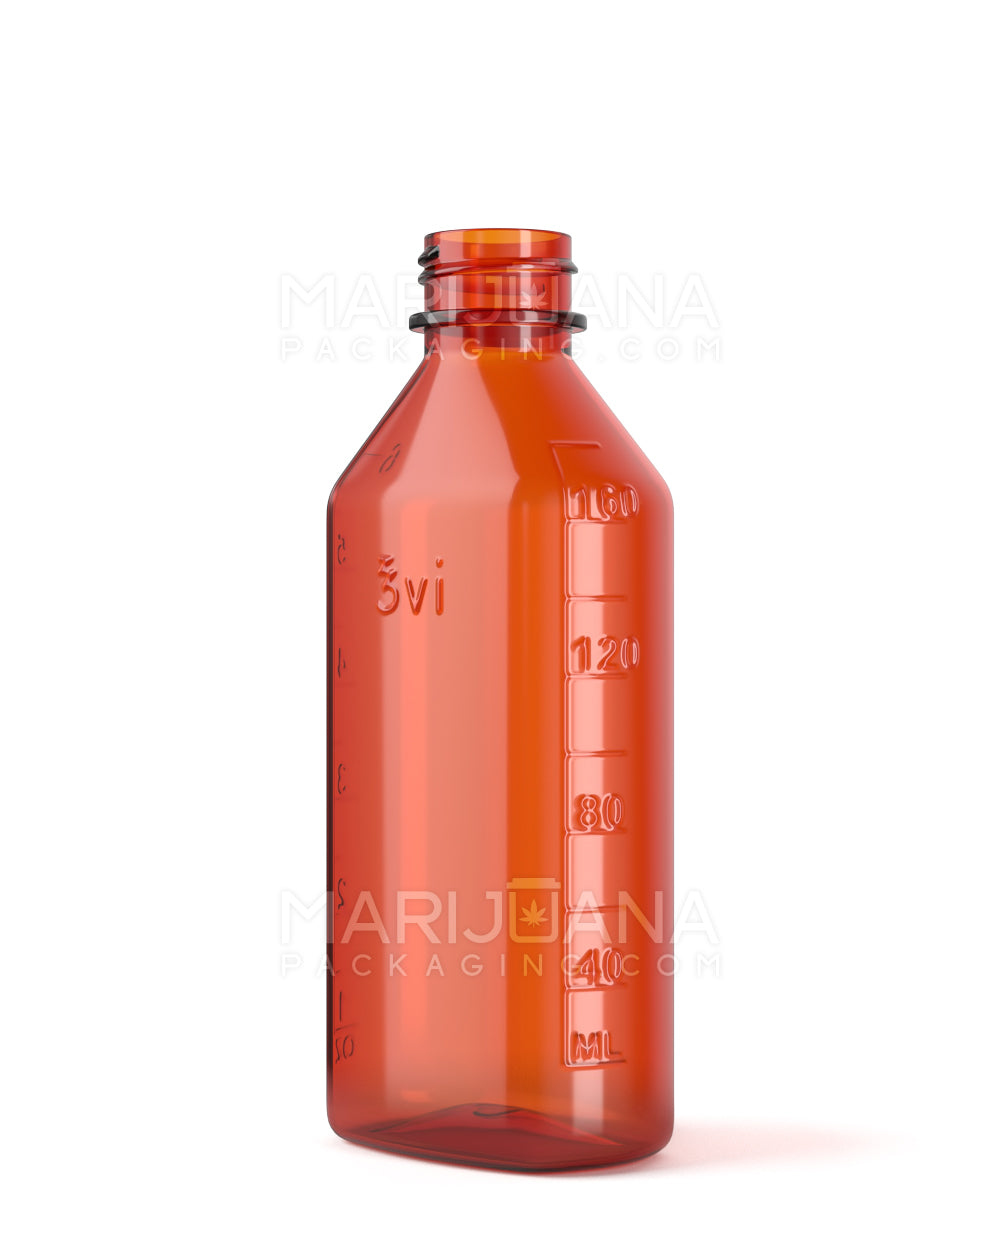 Child Resistant | Push Down & Turn Plastic Syrup Bottles | 6oz - Amber - 100 Count - 5